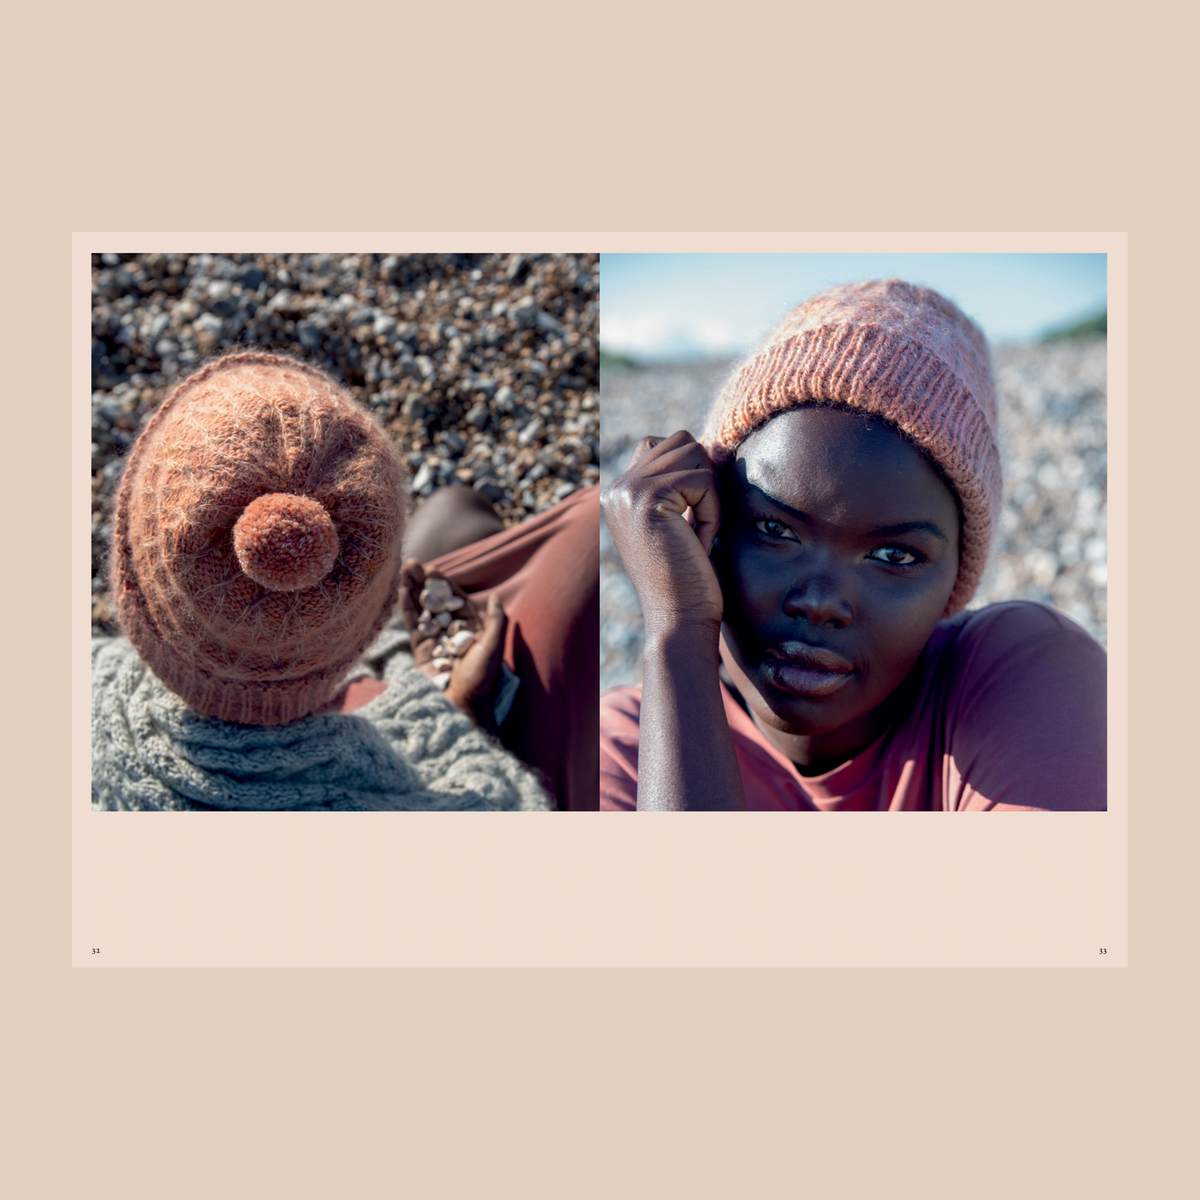 PomPom Issue 30 August 2019